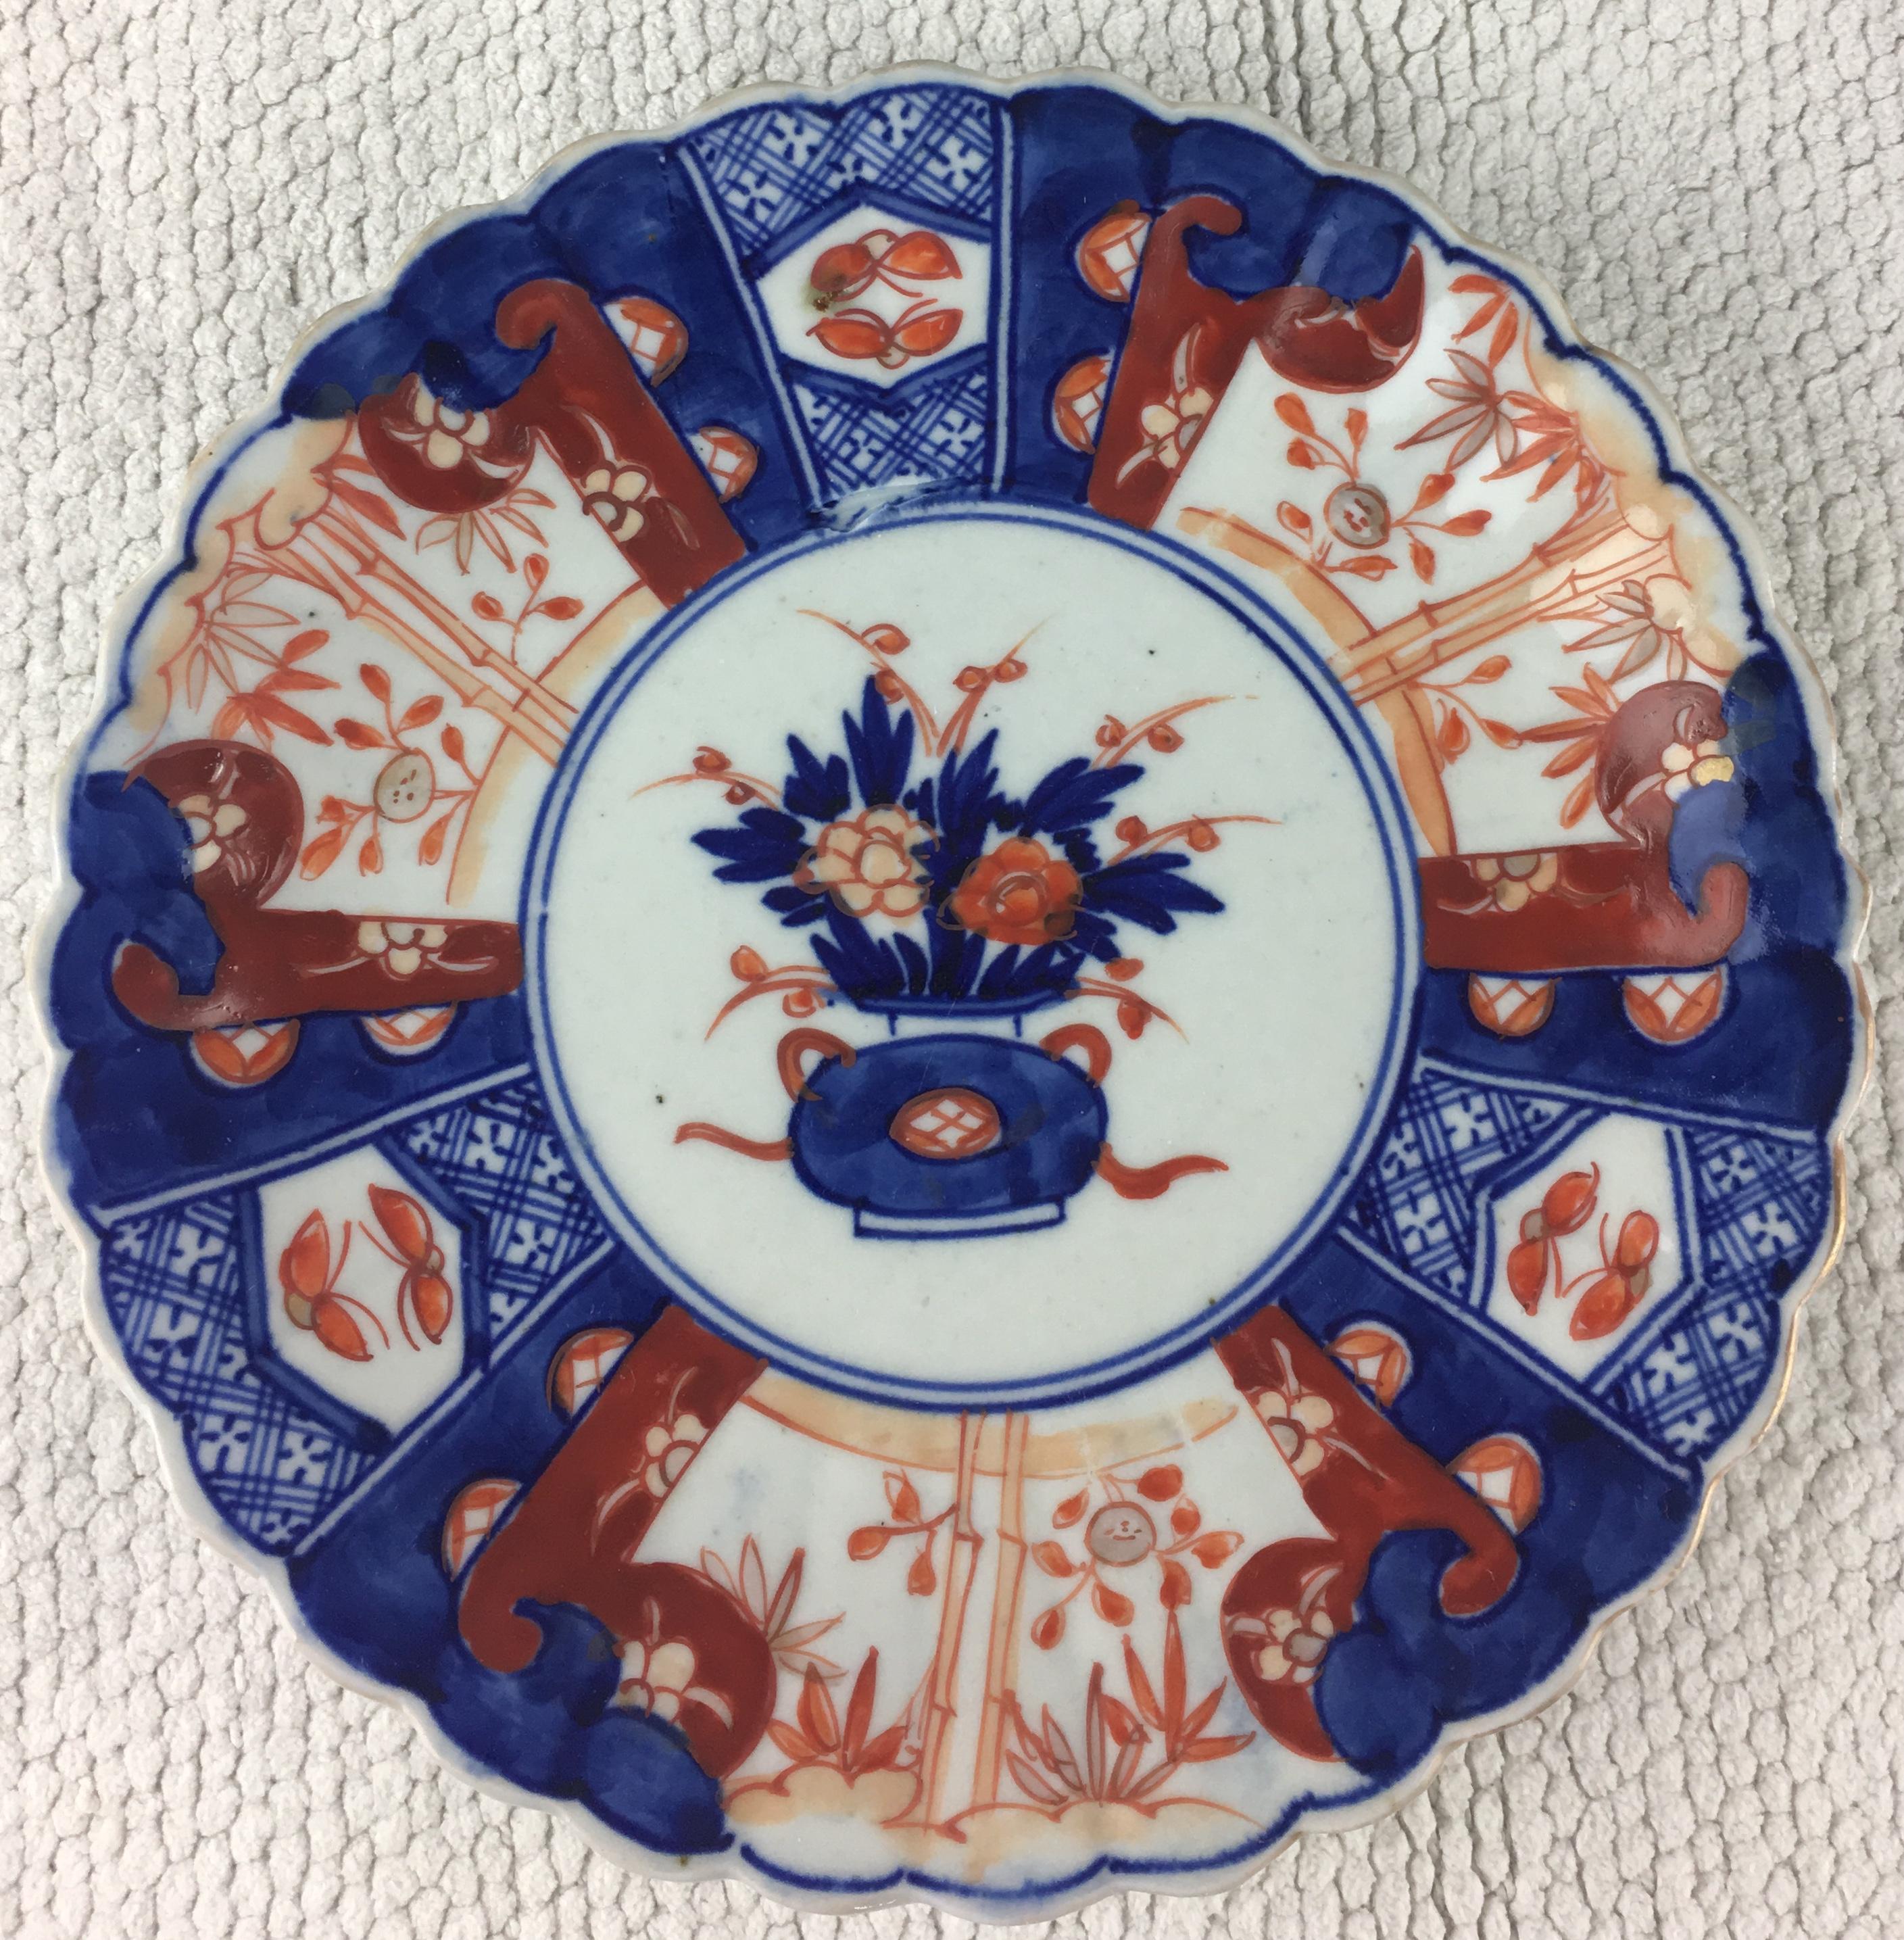 A stunning collection of six (priced individually) Meiji period petal shaped Imari plates in the very best of condition. With an overall floral decoration in blue, orange and green colors. The base has a basket of flowers in the centre section. It